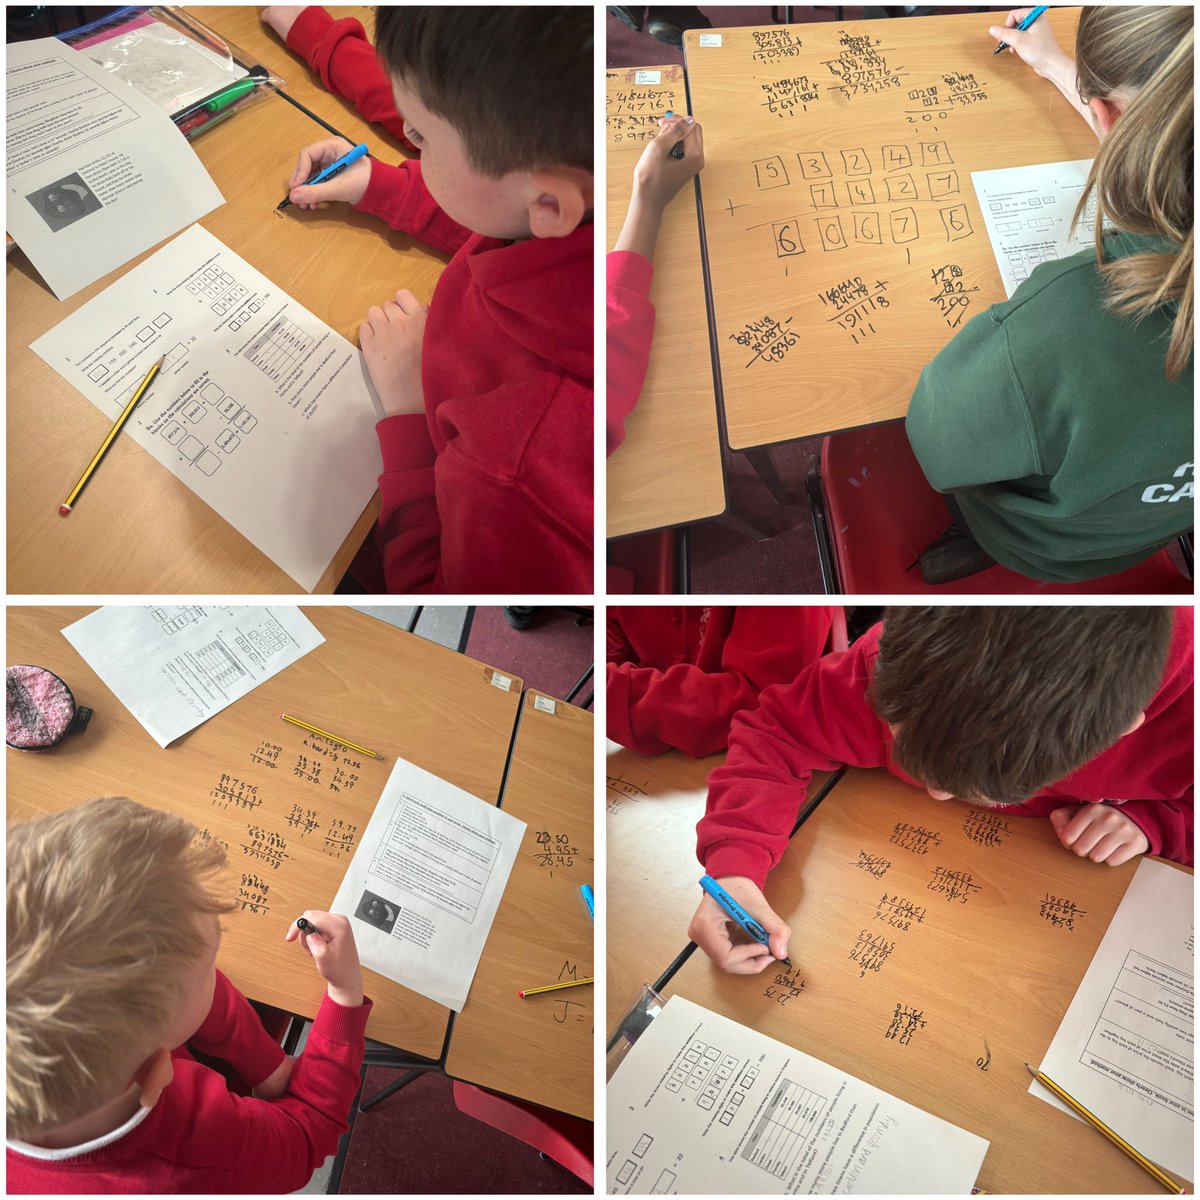 Maths revision on the tables today was a hit and fits perfectly for starting our Earth Day celebrations 🌎🌳🍃🖊️ #REACH #WygateWay #GreenPledge